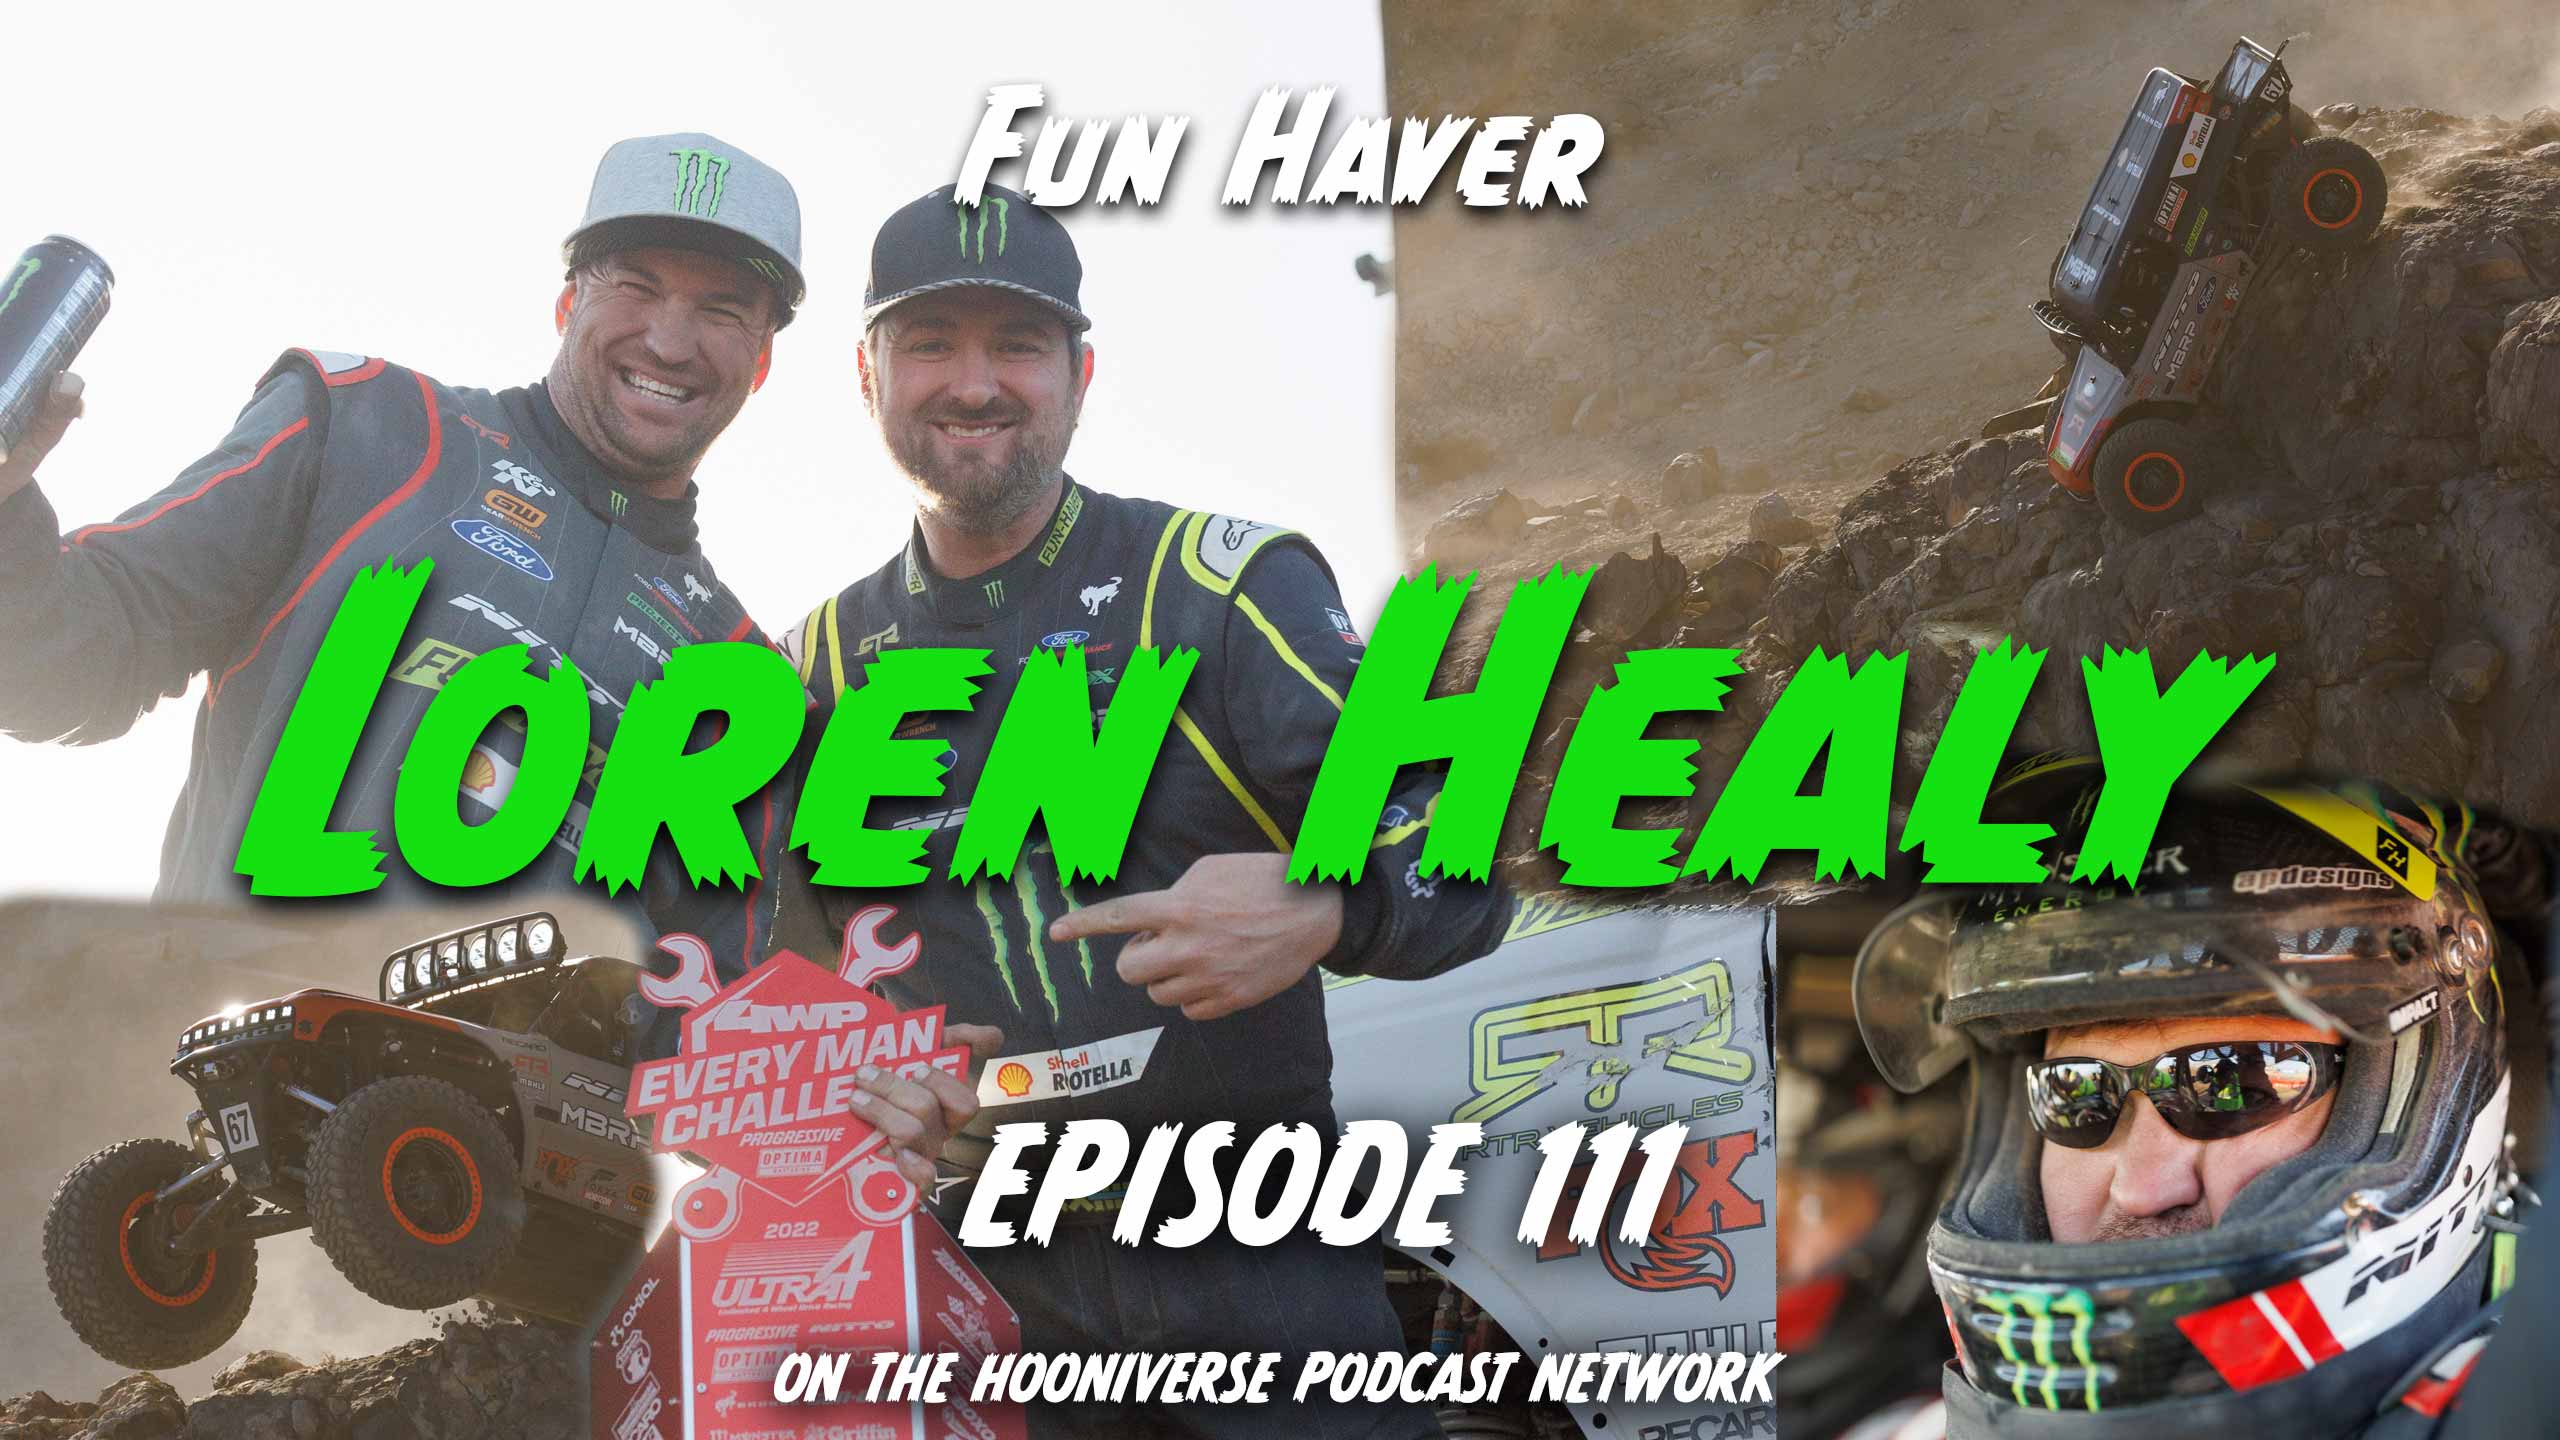 1.Loren-Healy-Fun-Haver-King-of-the-hammers-ultra4-Off-The-Road-Again-Podcast-Episode-111